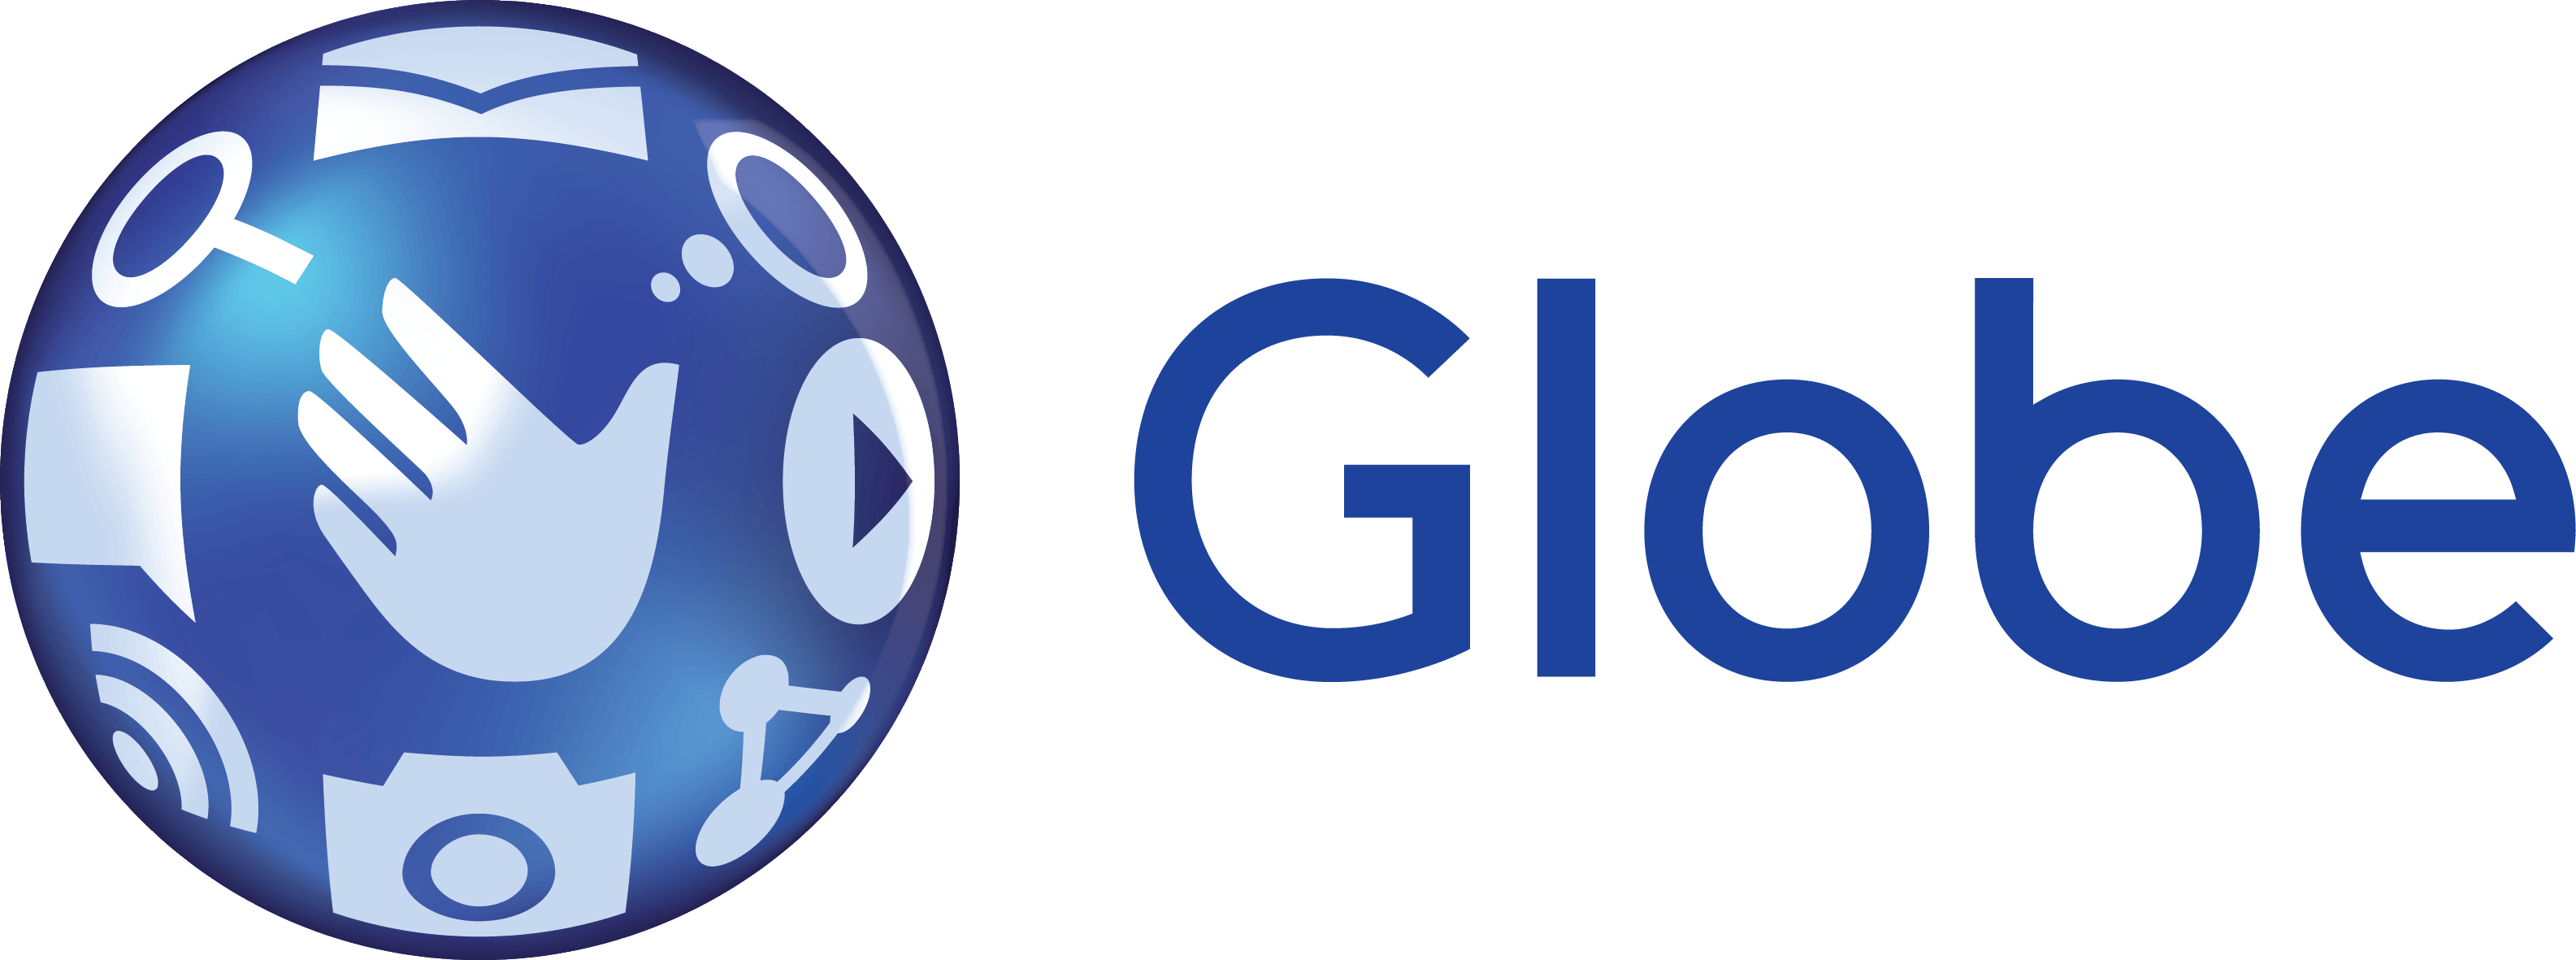 What Companies Use a Globe Logo - Globe: PH needs more than 2 tower companies to catch up